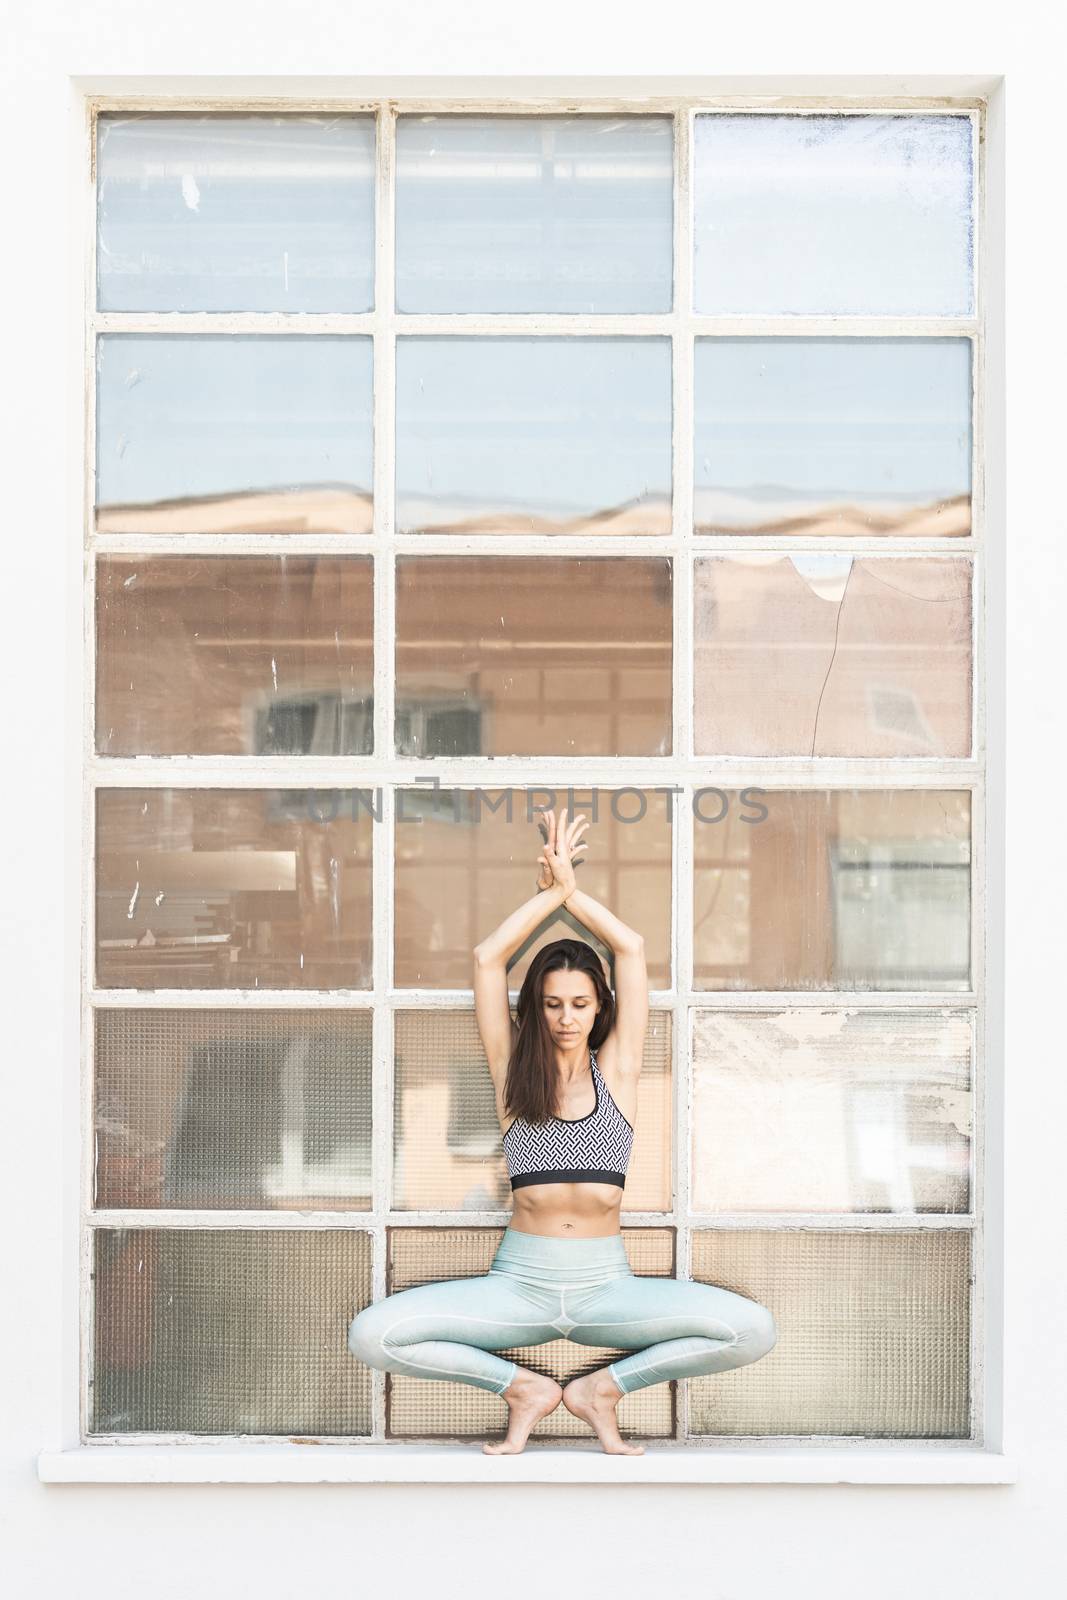 Fit sporty active girl in fashion sportswear doing yoga fitness exercise in front of big industrial window frame. colorful reflections in window glass. Outdoor sports, urban style yoga.